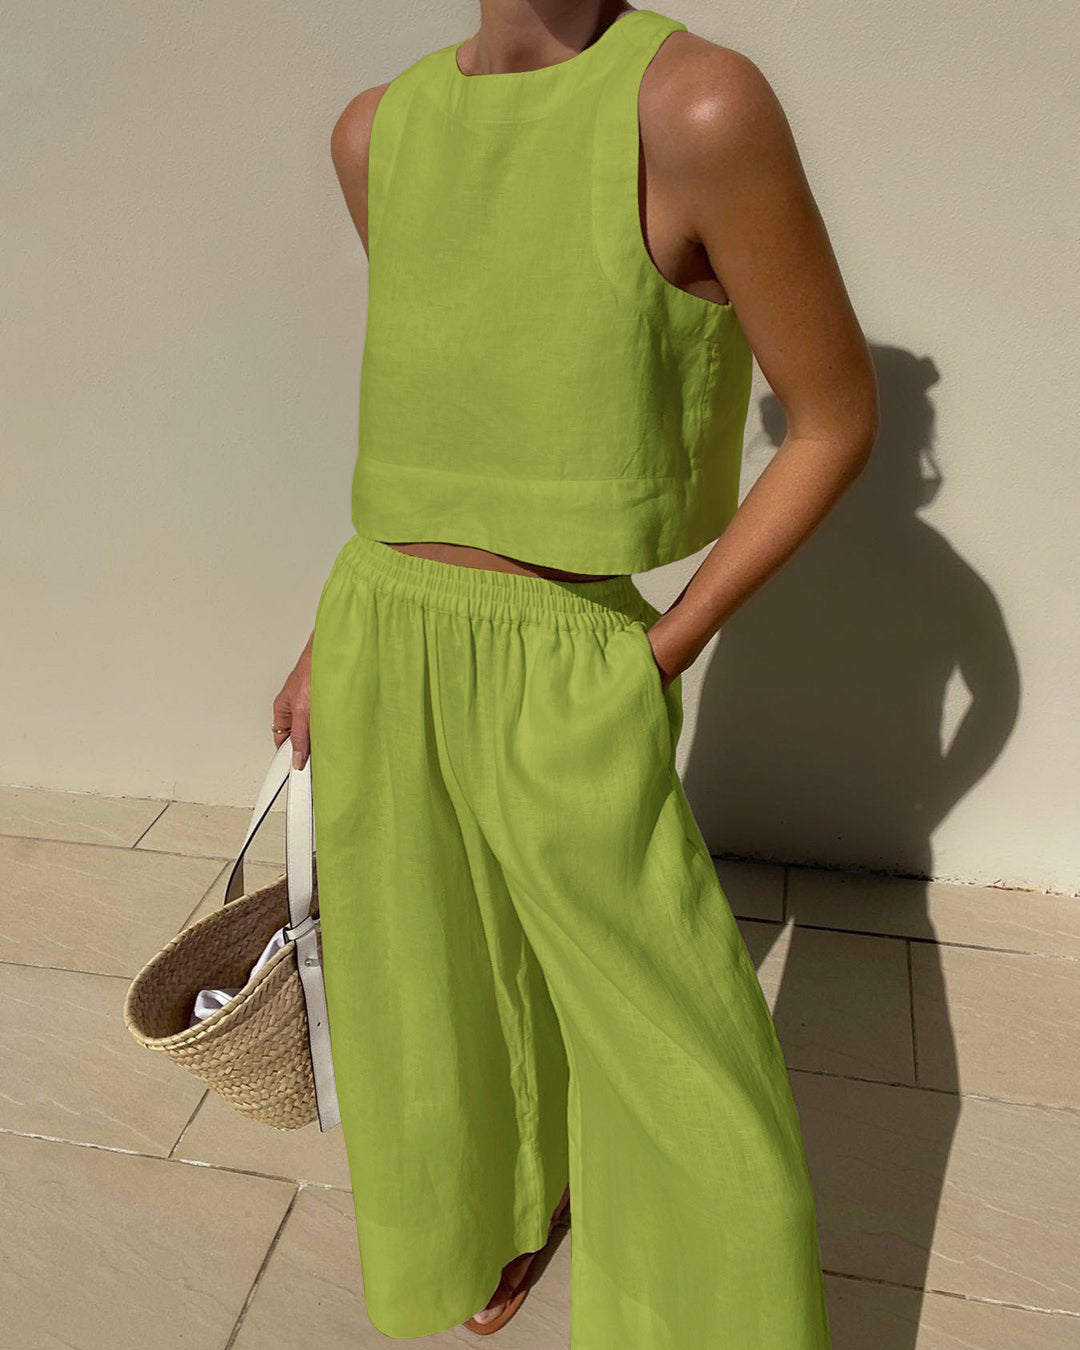 NTG Fad SUIT Green / S Chic Solid Linen Sleeveless 2-Piece Set